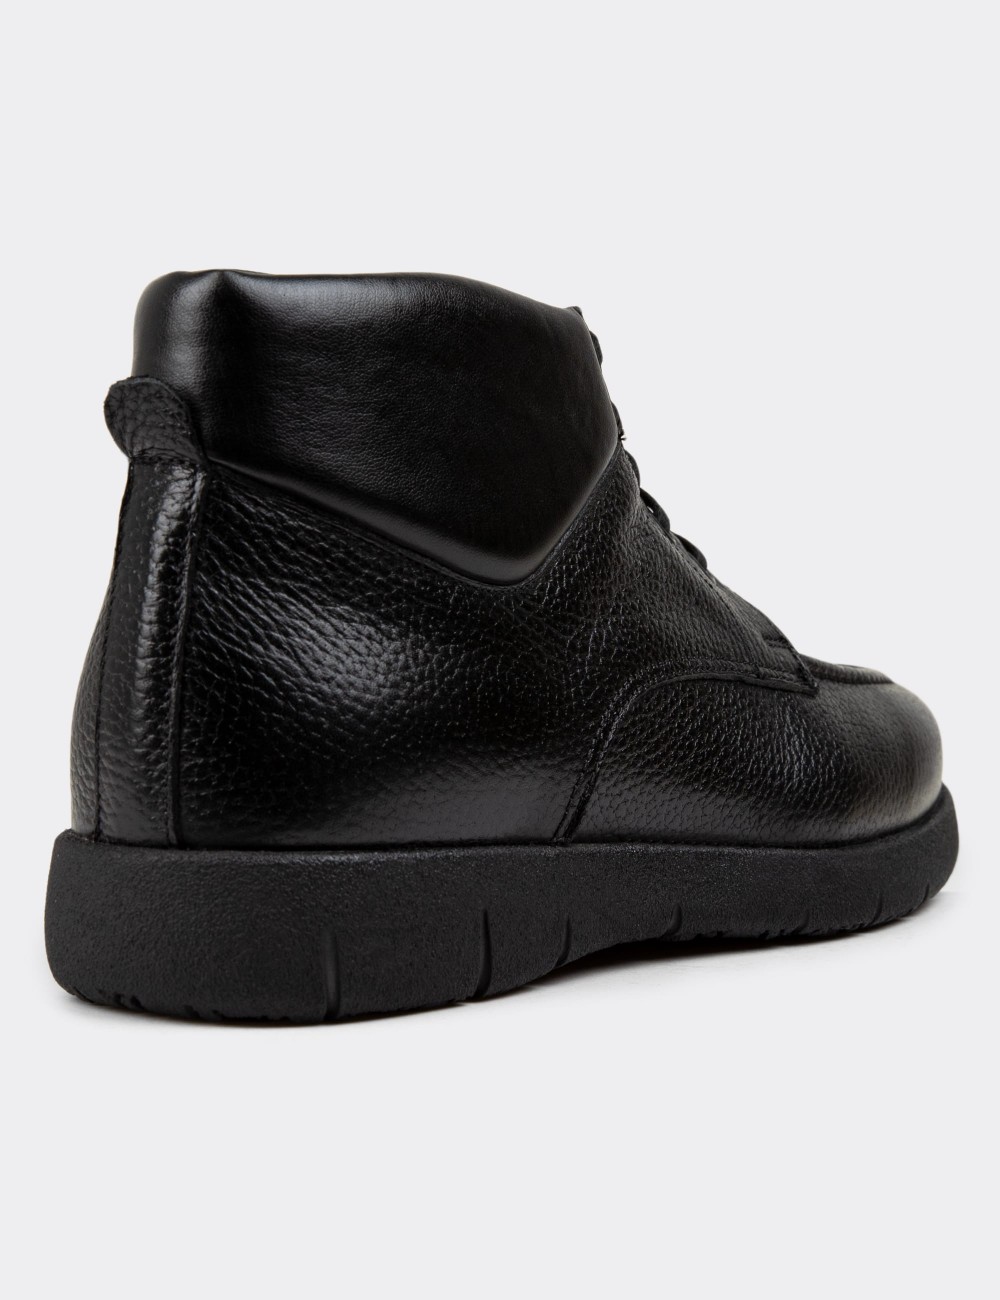 Black Leather Boots - 01928MSYHC01